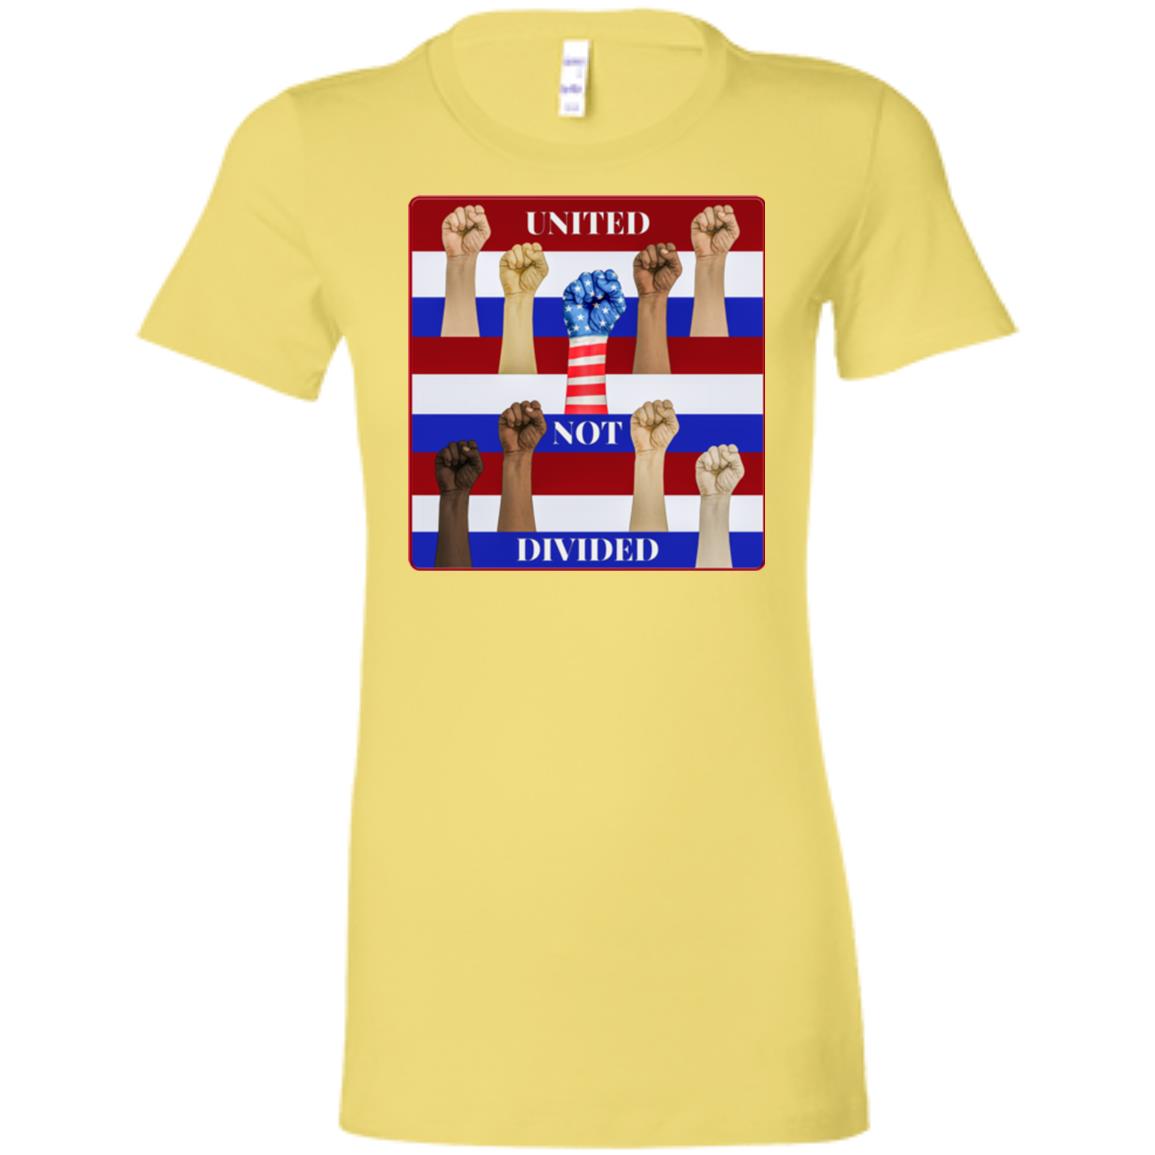 united not divided - Women's Fitted T-Shirt